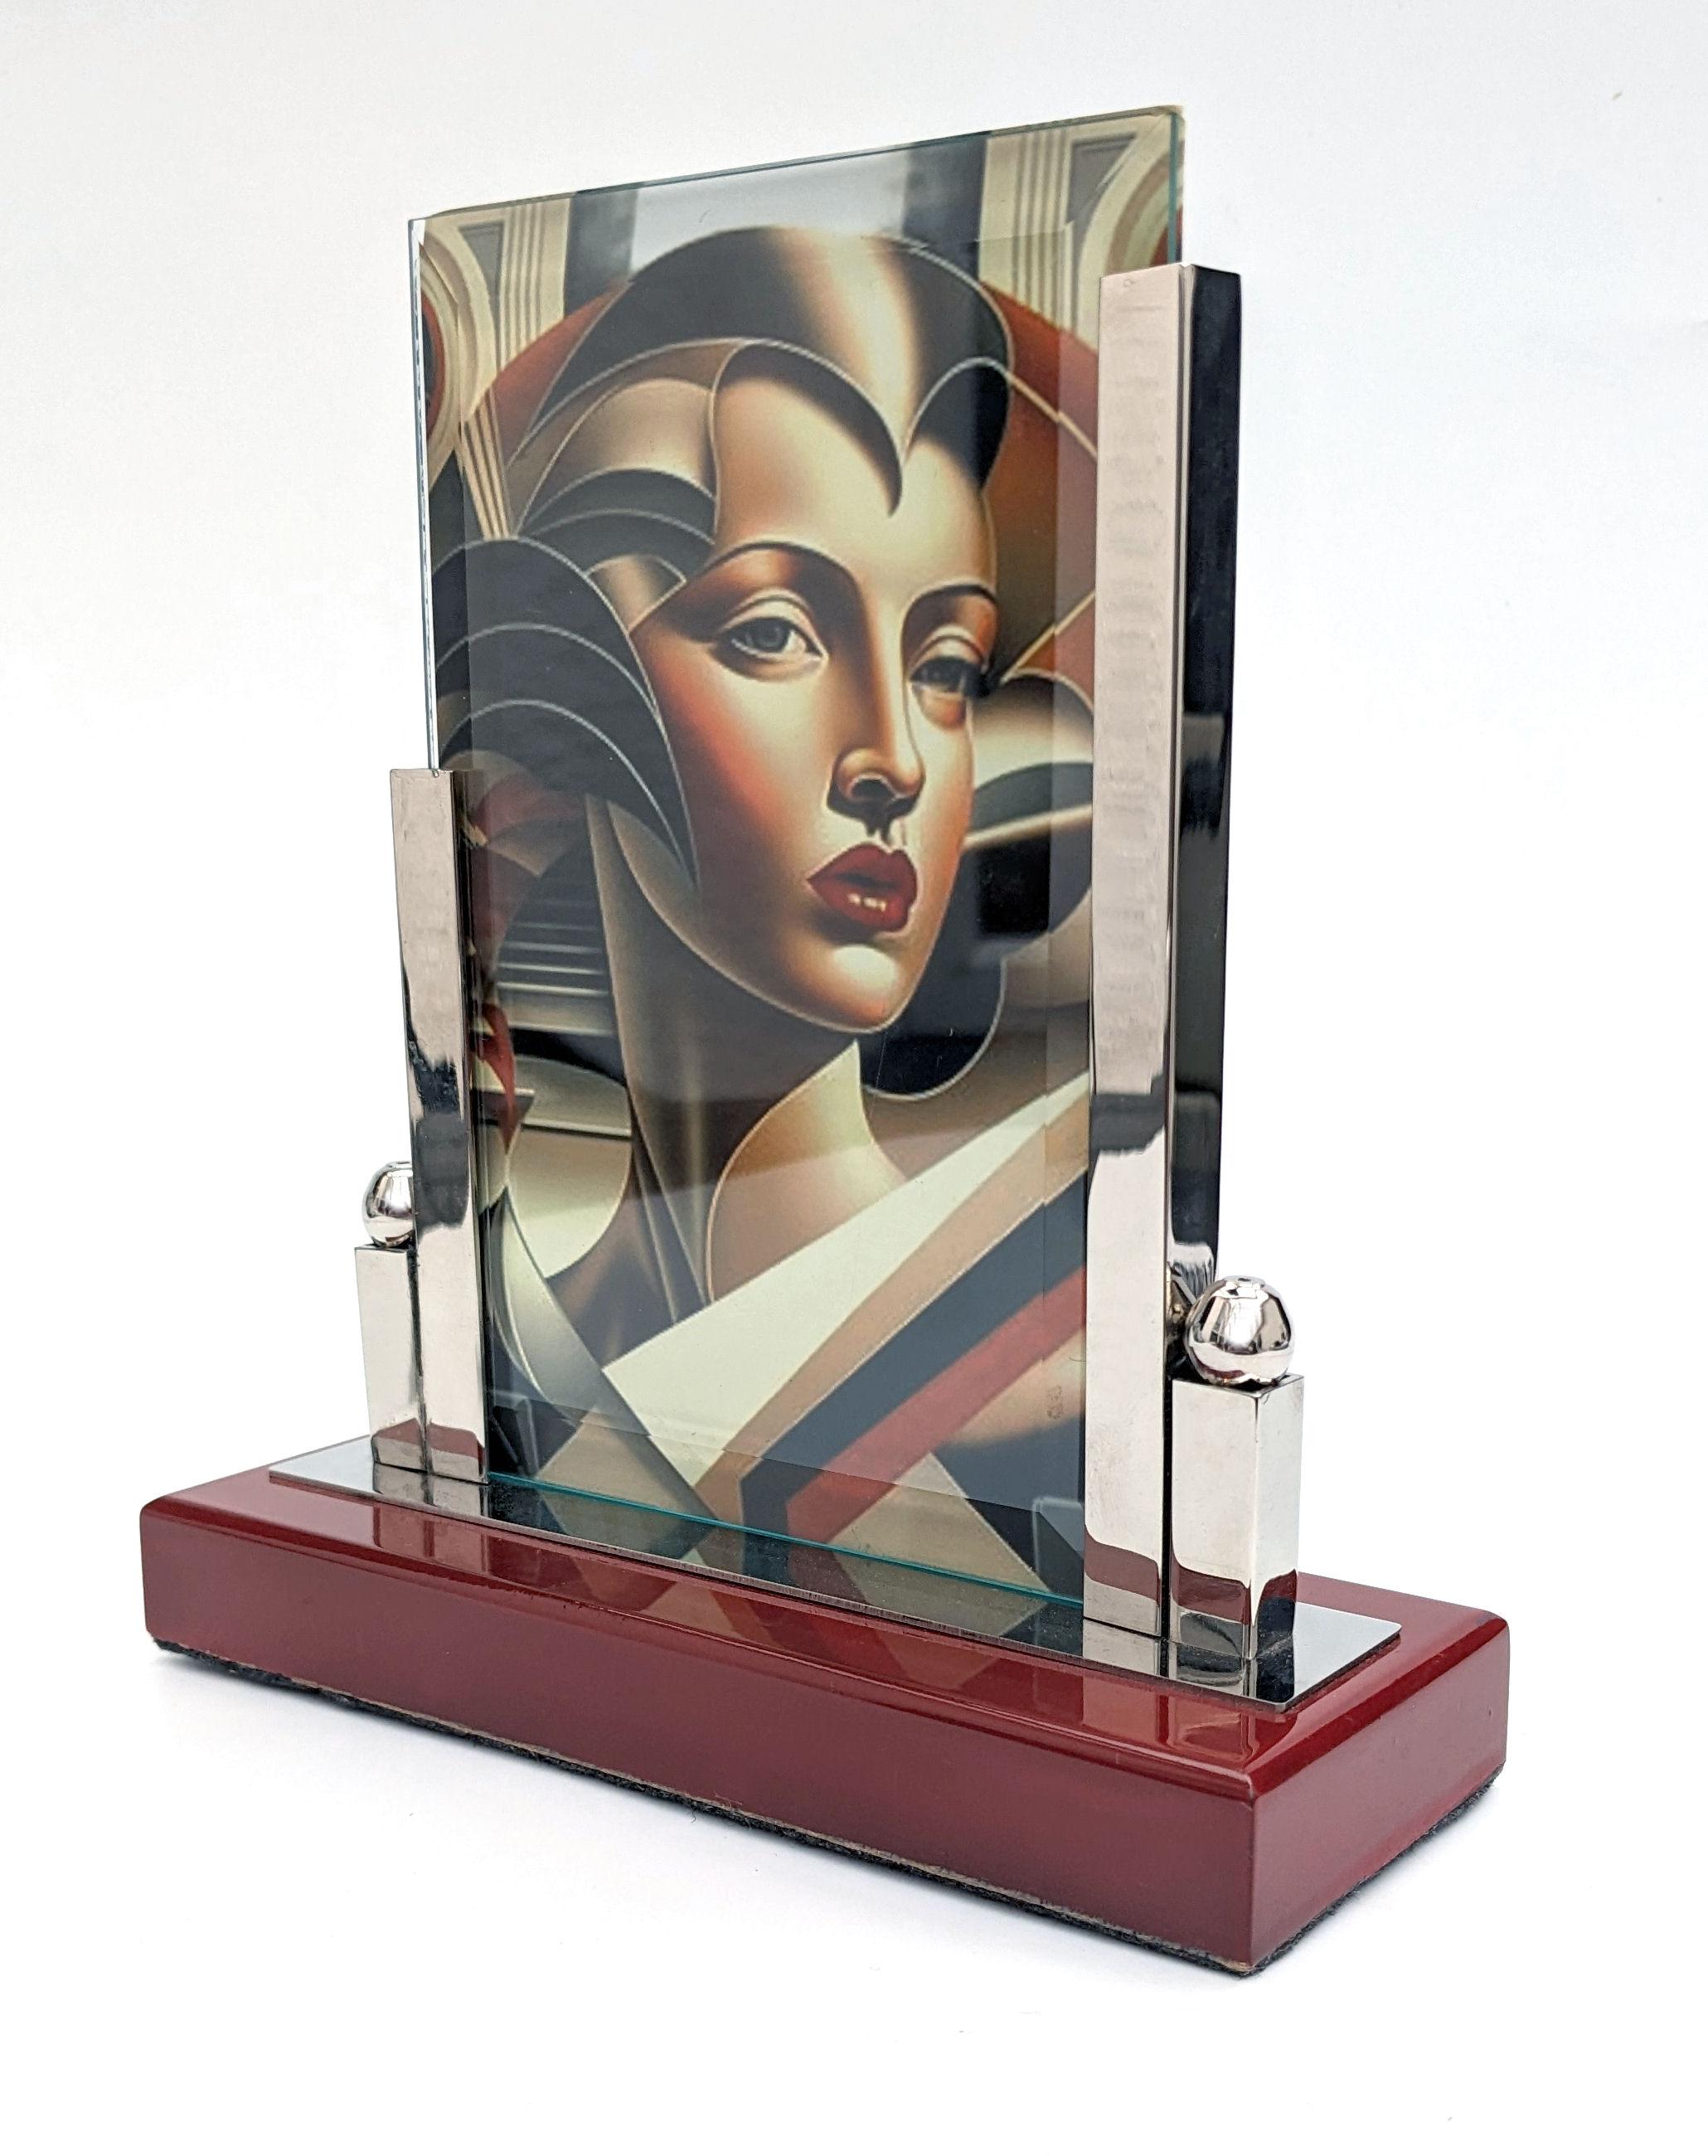 Superb 1930's Art Deco modernist free standing picture frame in chrome and glass. The frame has two pieces of glass which slot into the chrome stand. You can display a picture both to the front and back. Highly lacquered red wooden base with